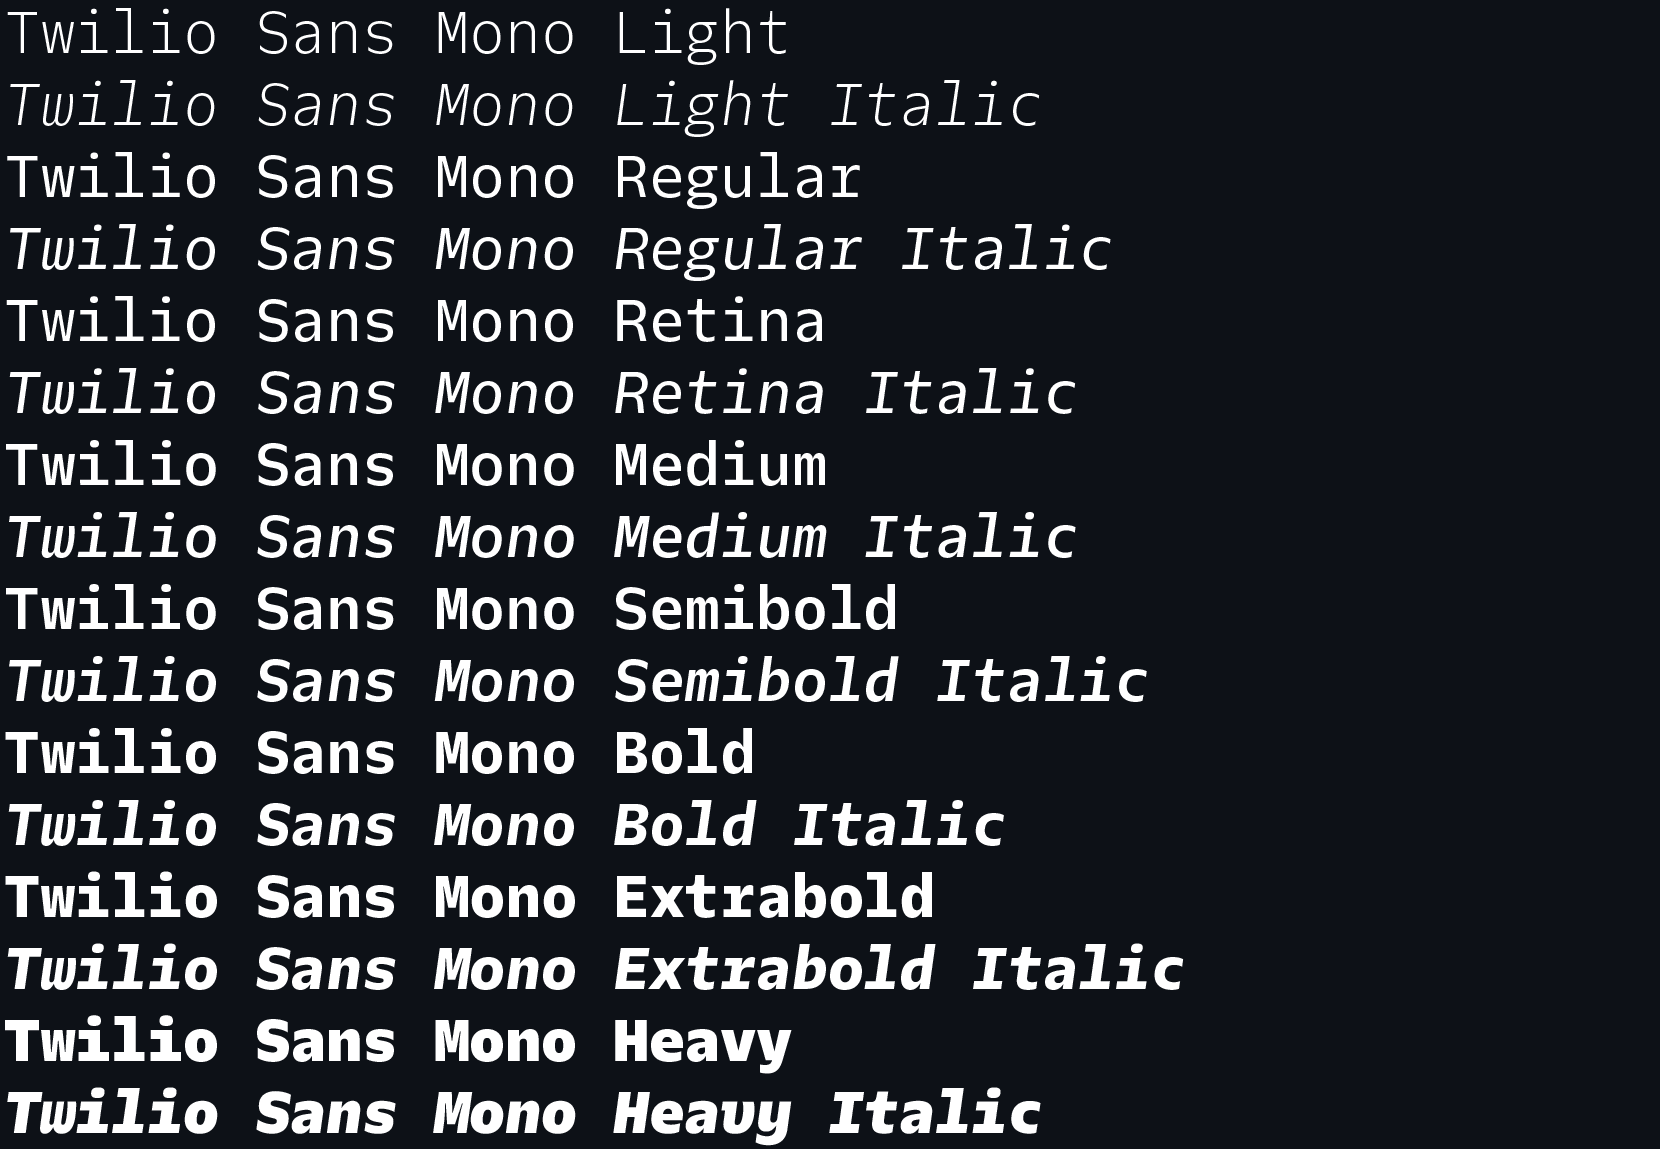 Screenshot of the included weights of Light, Medium, Regular, Retina, Semibold, Bold, Extrabold and Heavy as well as their respective italics versions